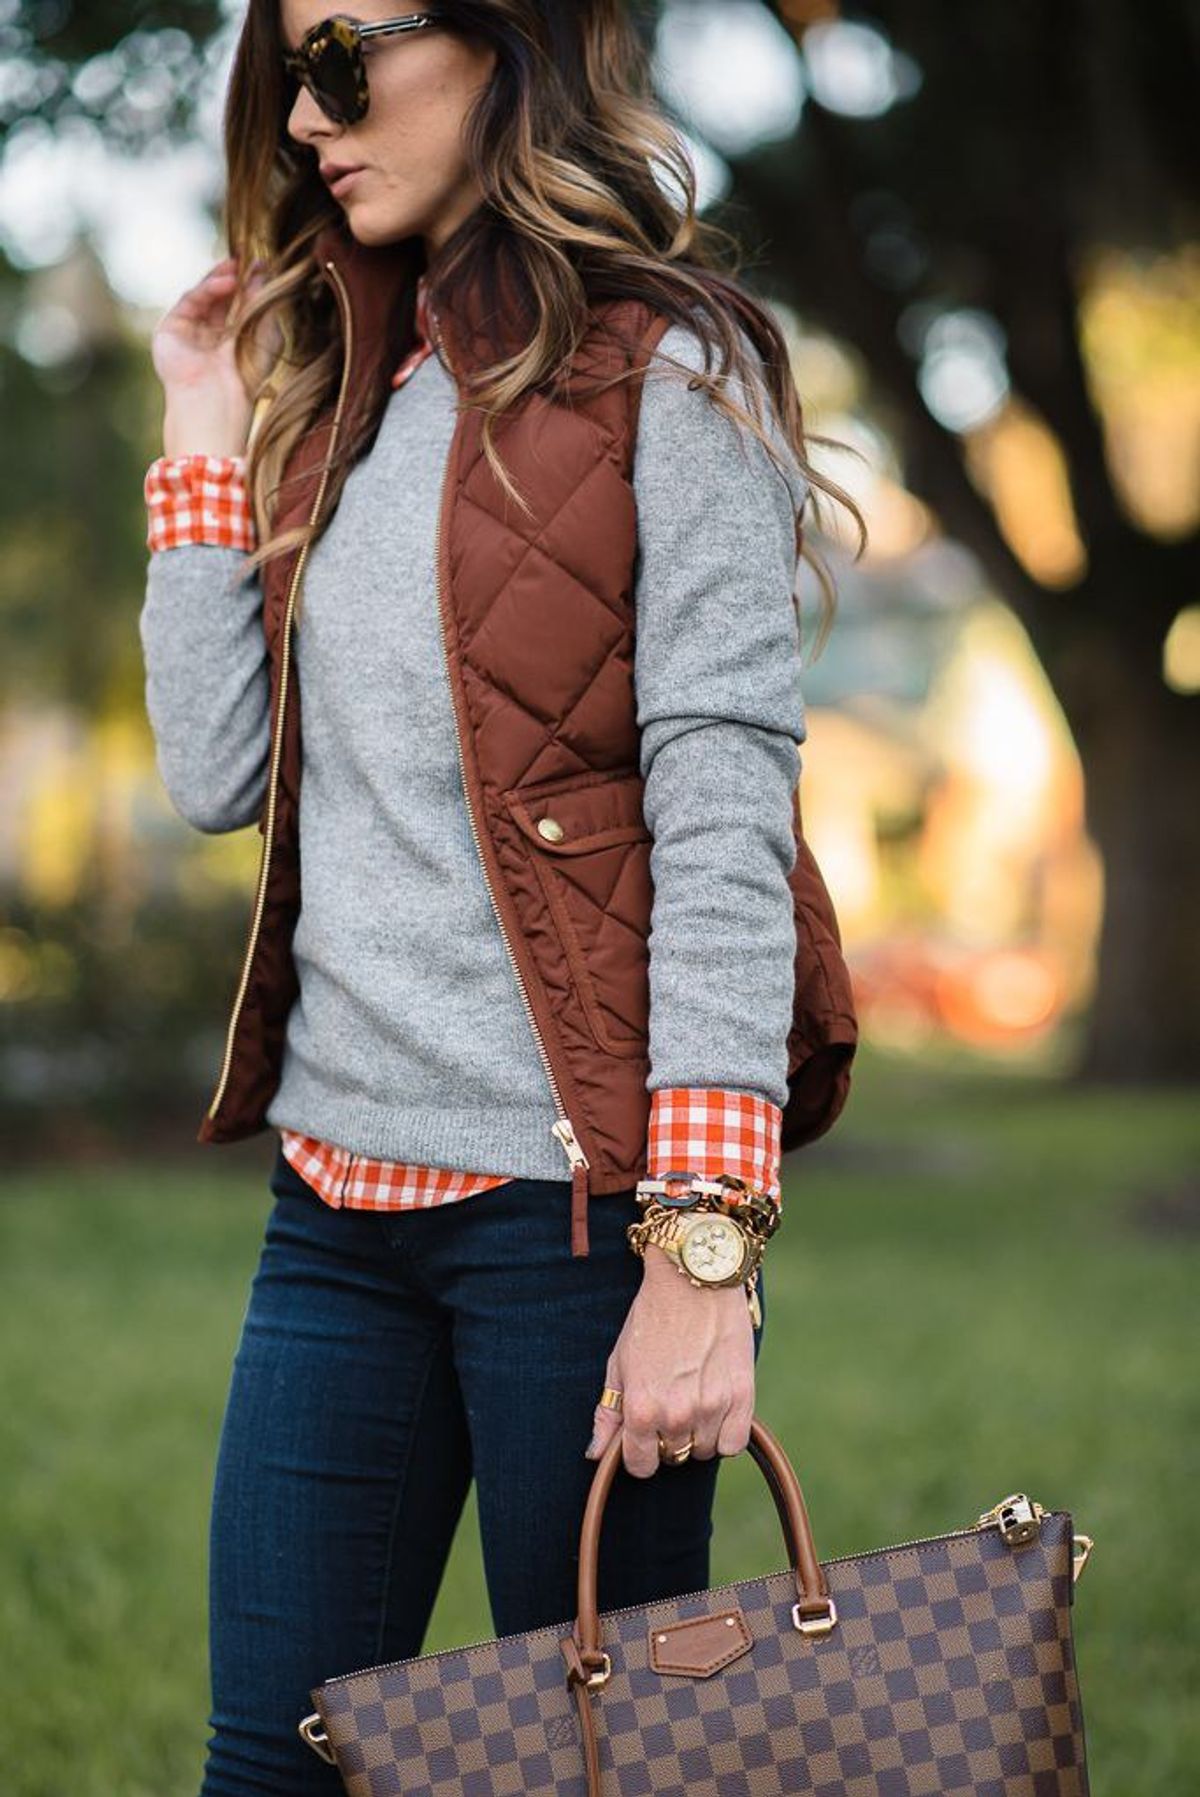 11 Fall Trends to Look For on Campus